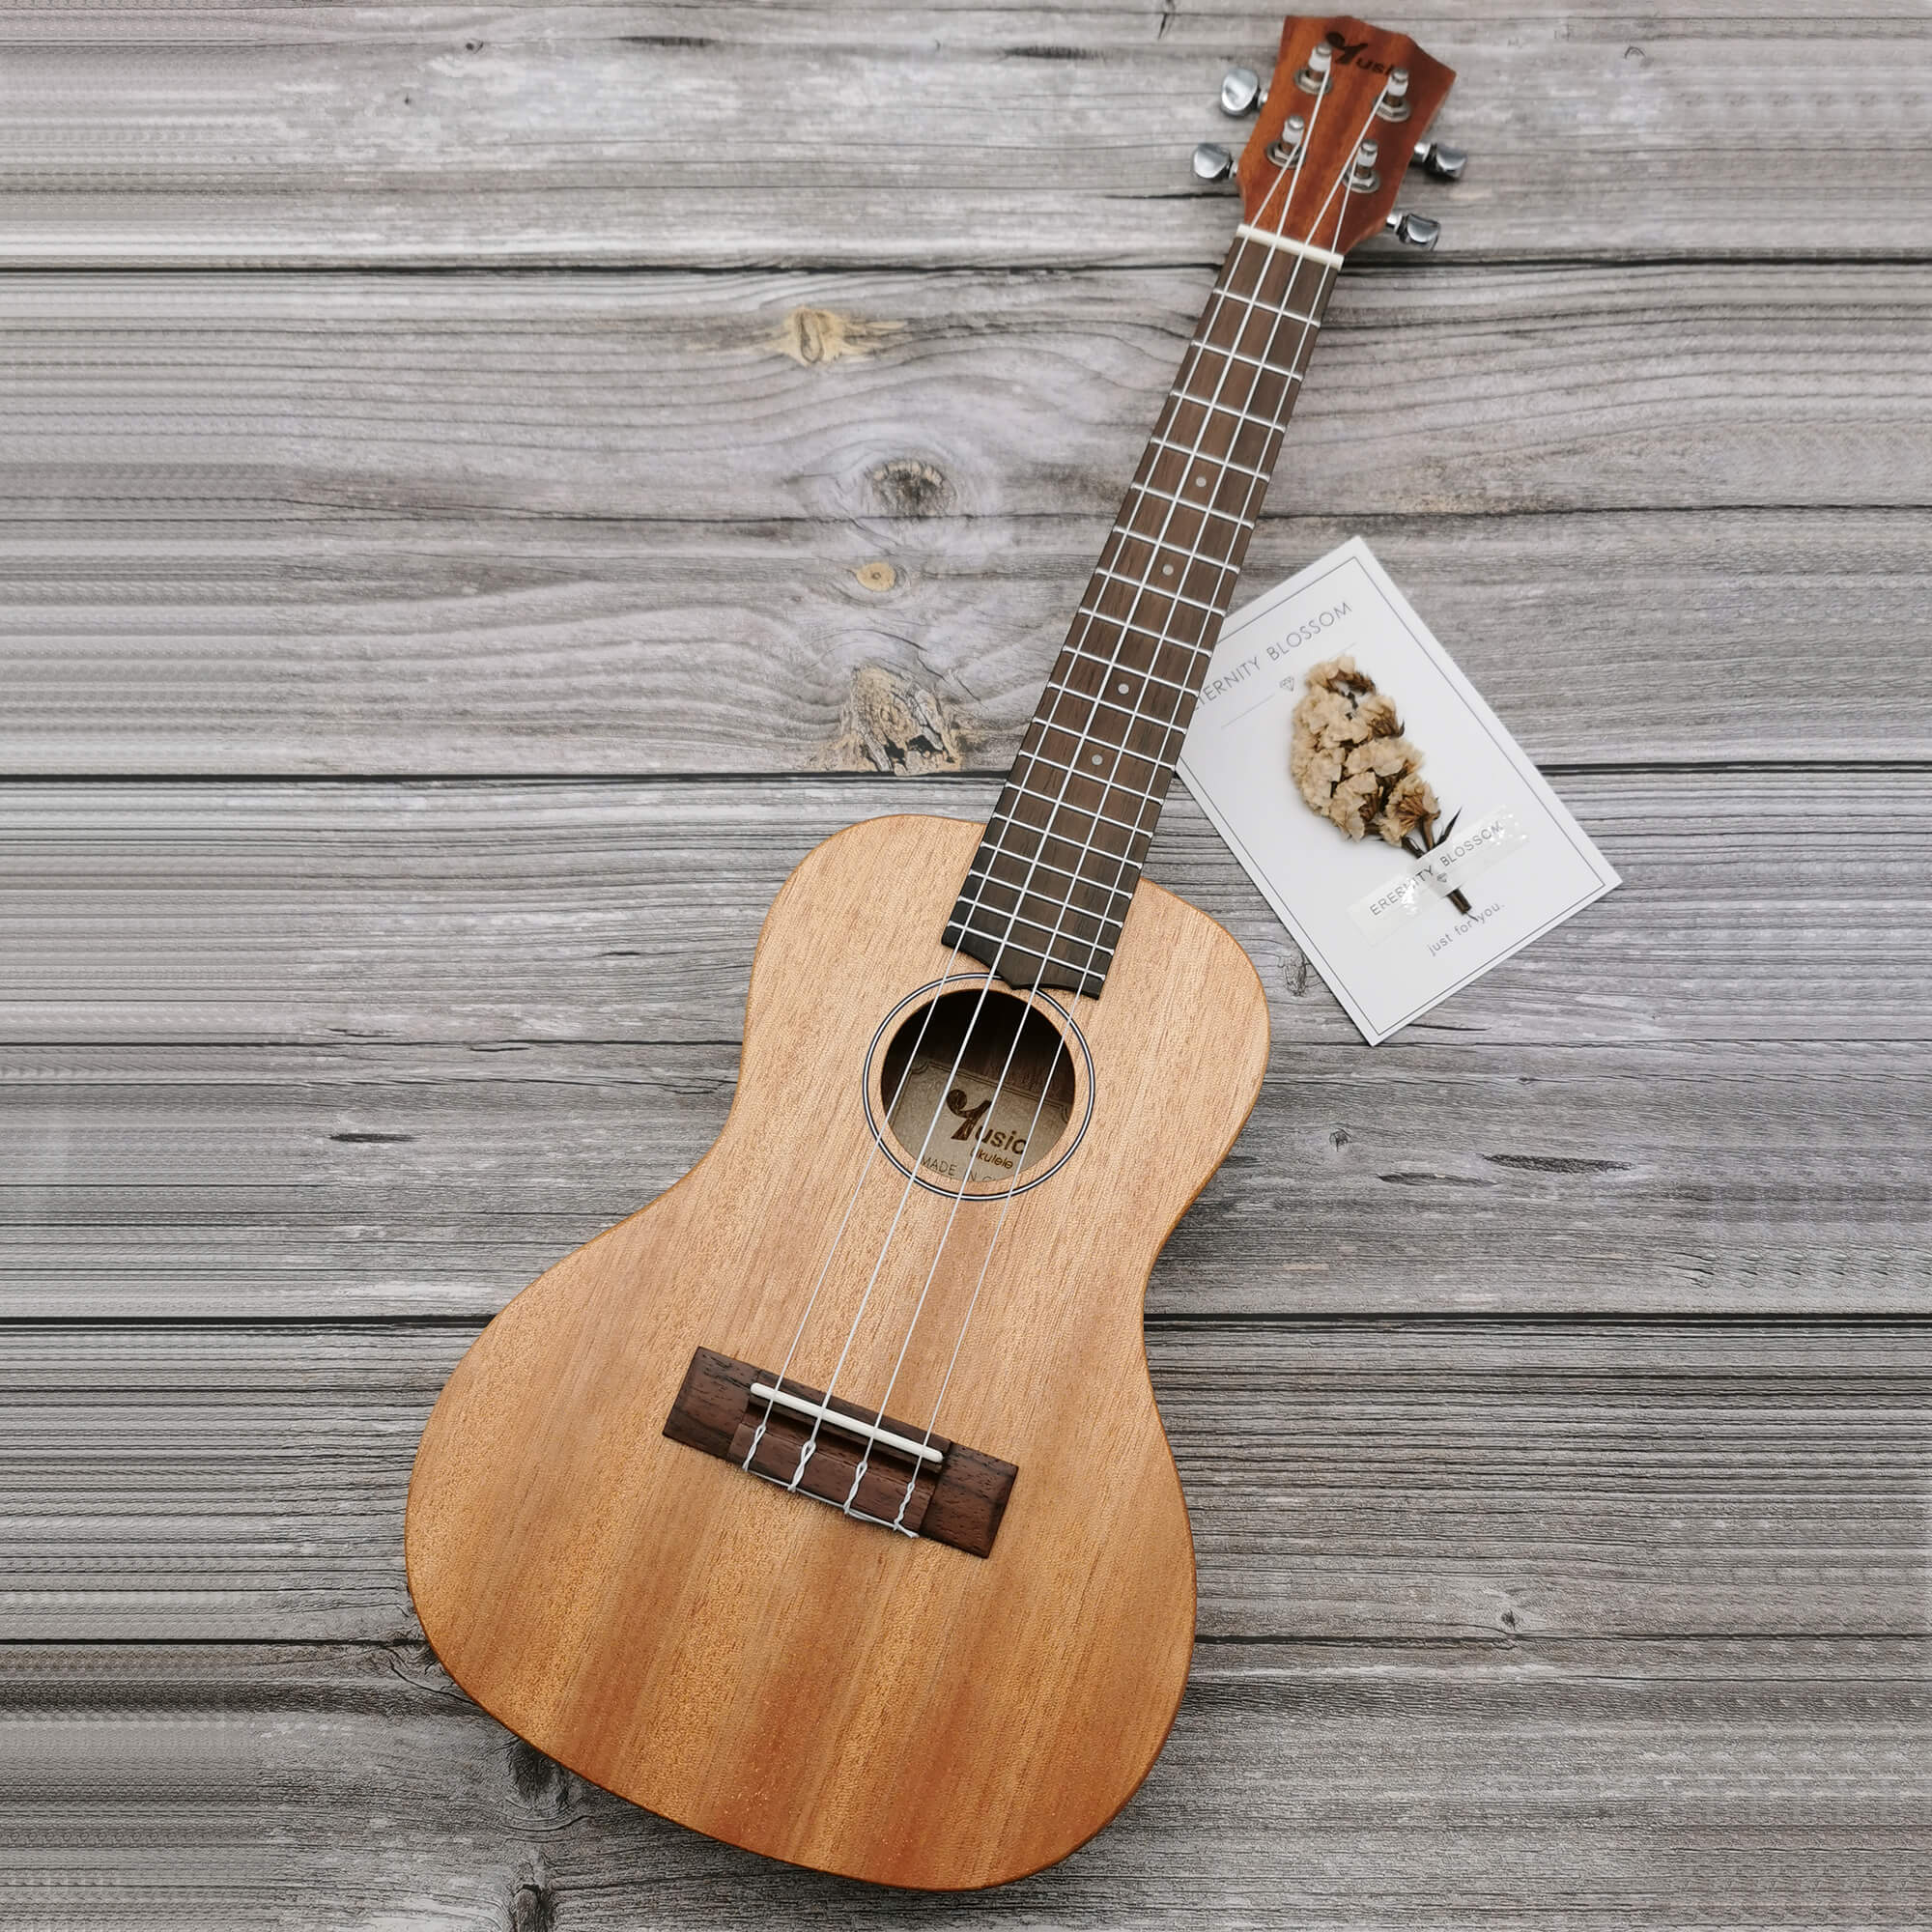 23 Inch Concert Ukulele (Solid Top Mahogany Wood) Free Bag While Stock ...